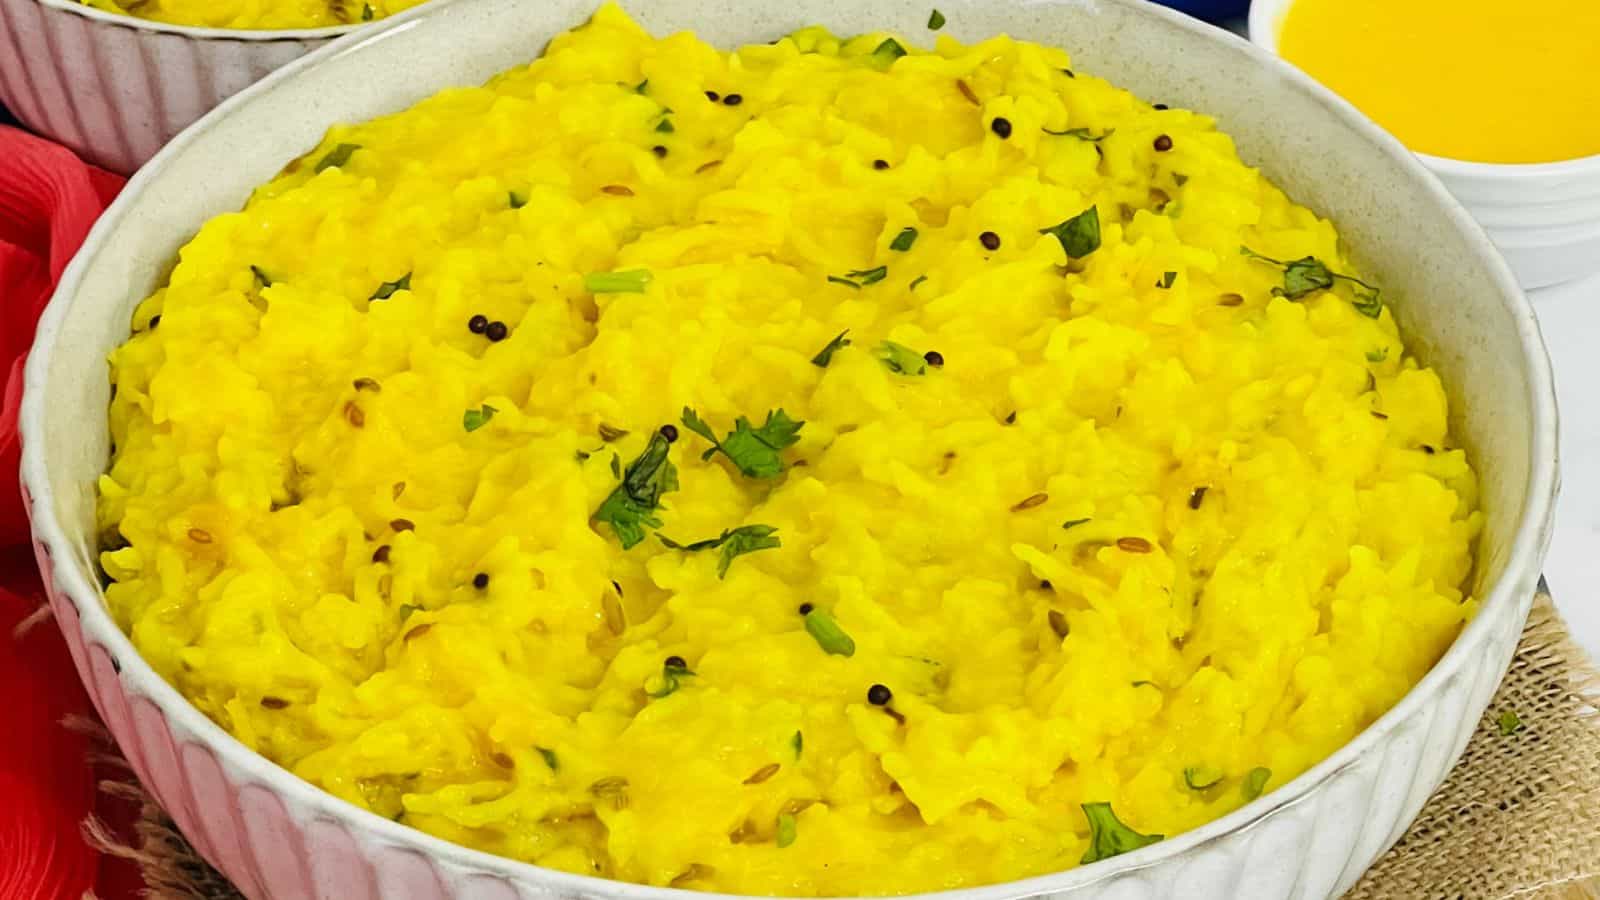 A bowl of yellow rice garnished with herbs and spices, placed on a red mat with a glass of orange juice in the background.